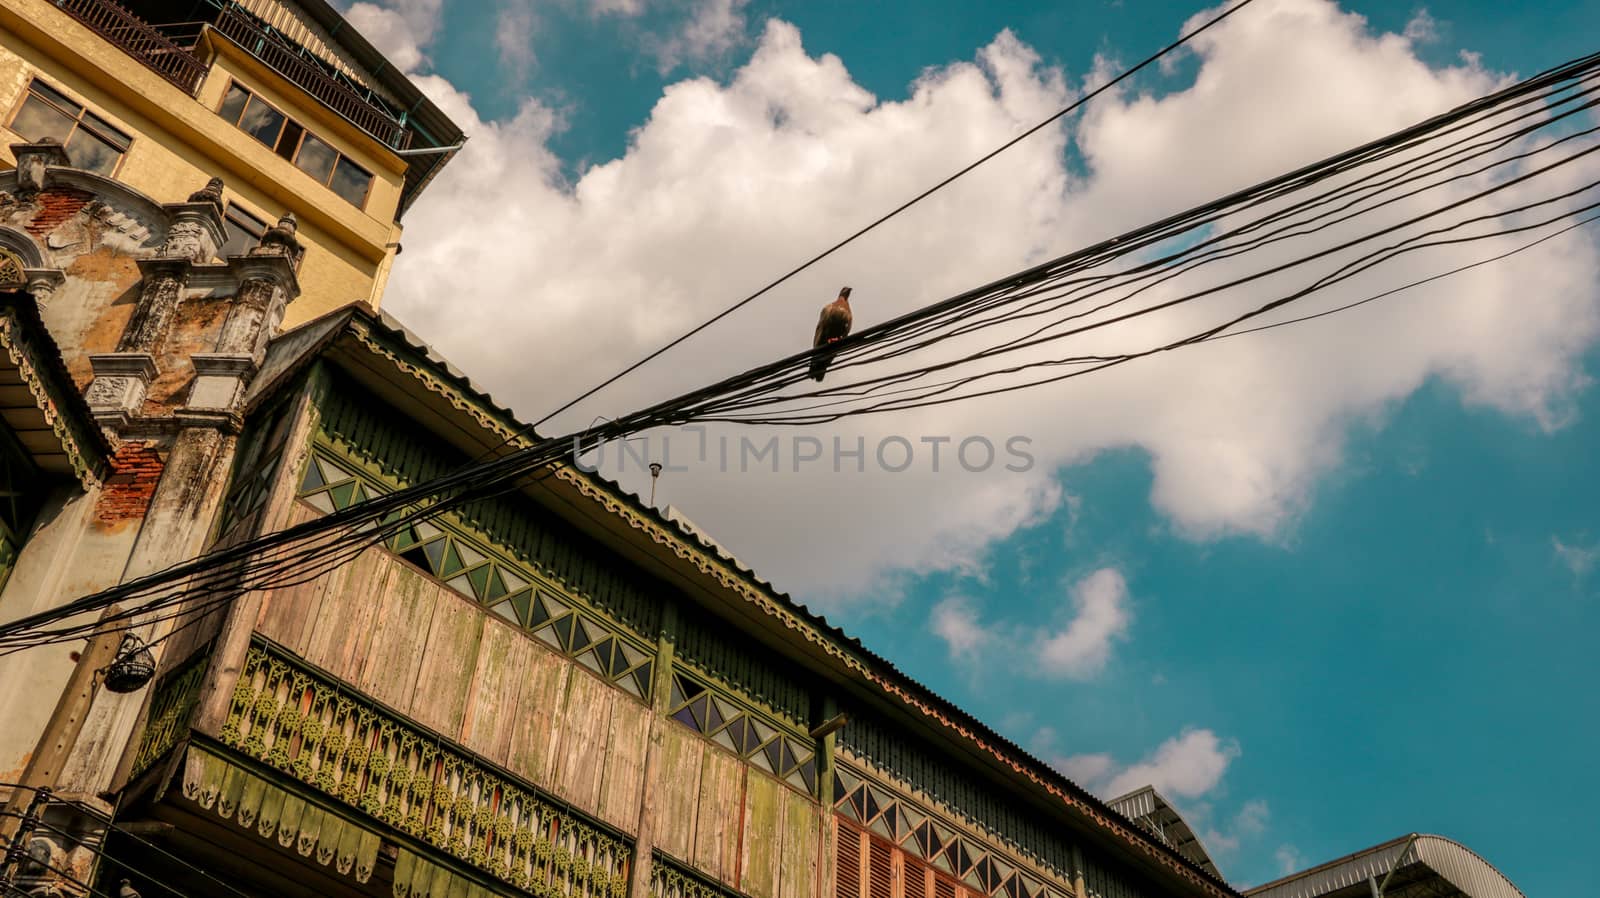 Ancient Wooden House with a Bird on Electric Wires. Low Angle View. Bright Sunny Sky with Clouds.